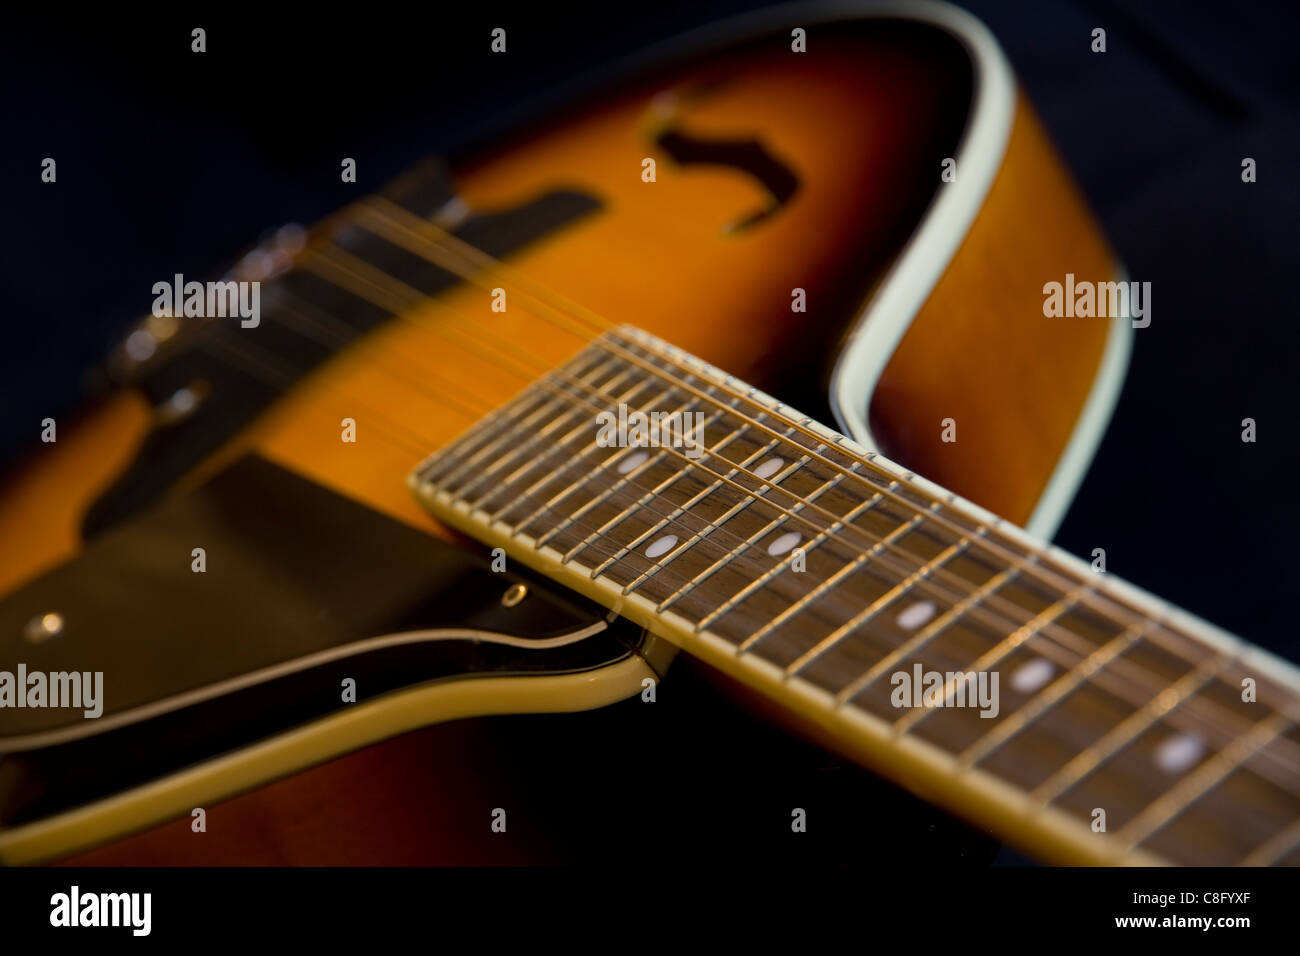 A close-up abstract of an A-frame Washburn mandolin fretboard on a black background Stock Photo